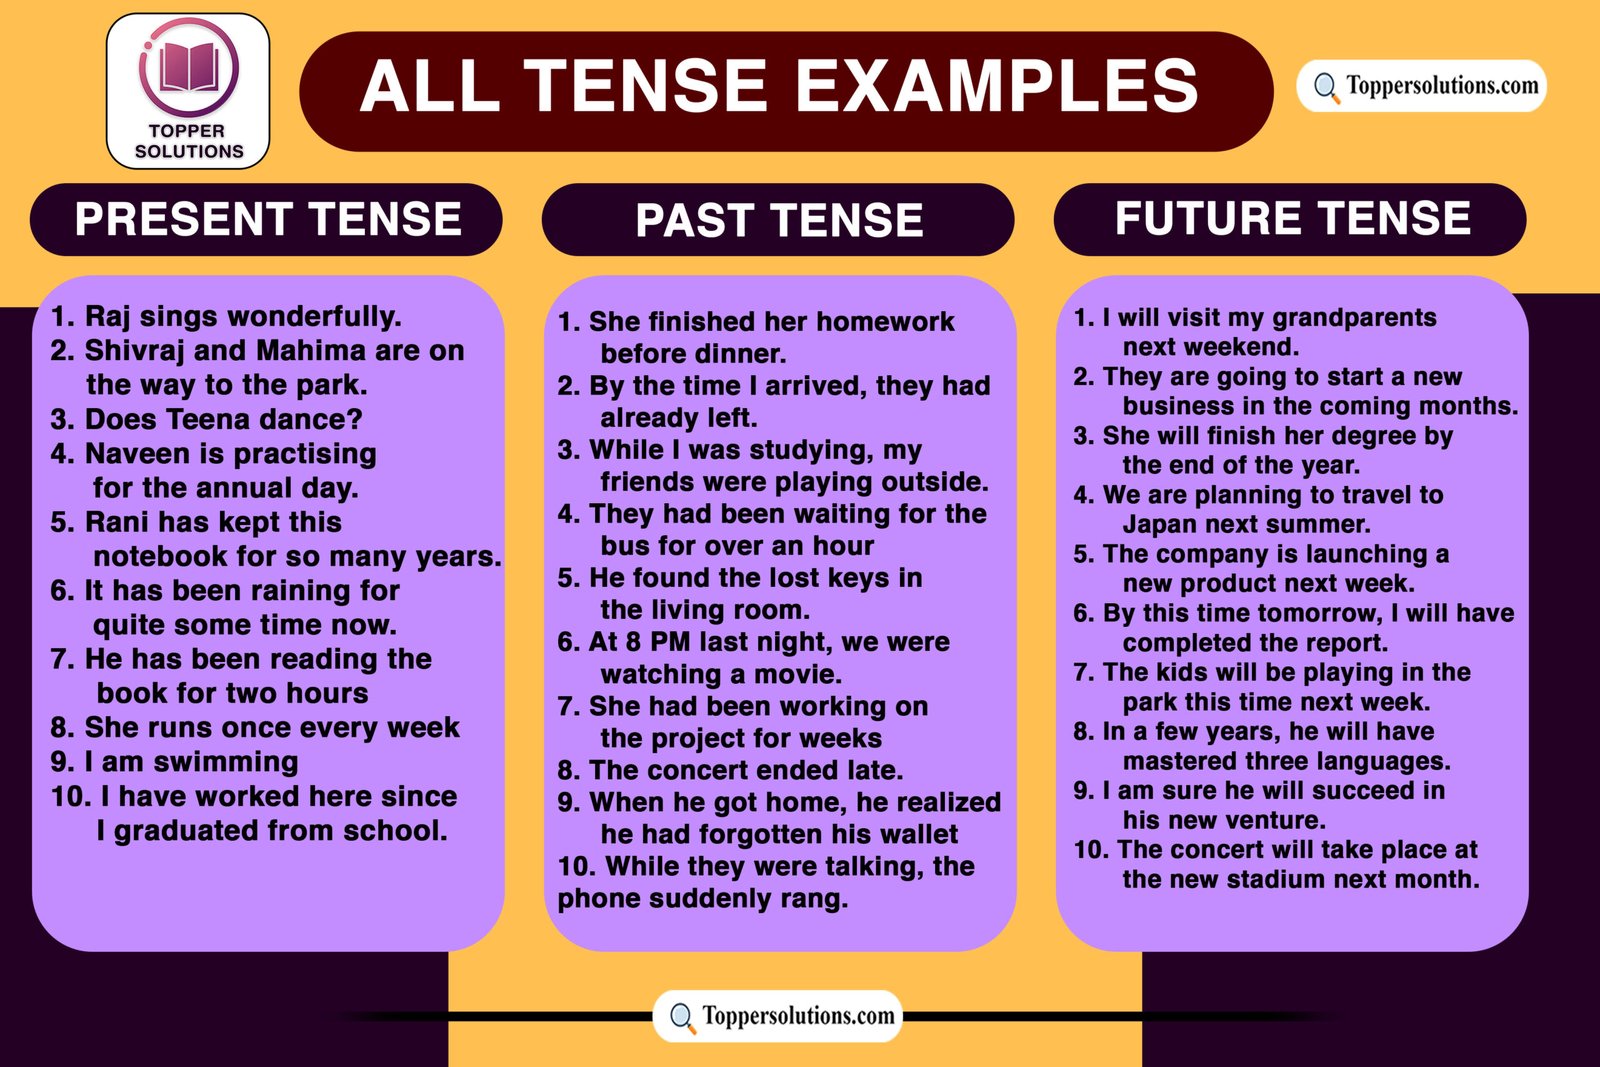 A Tense chart with examples